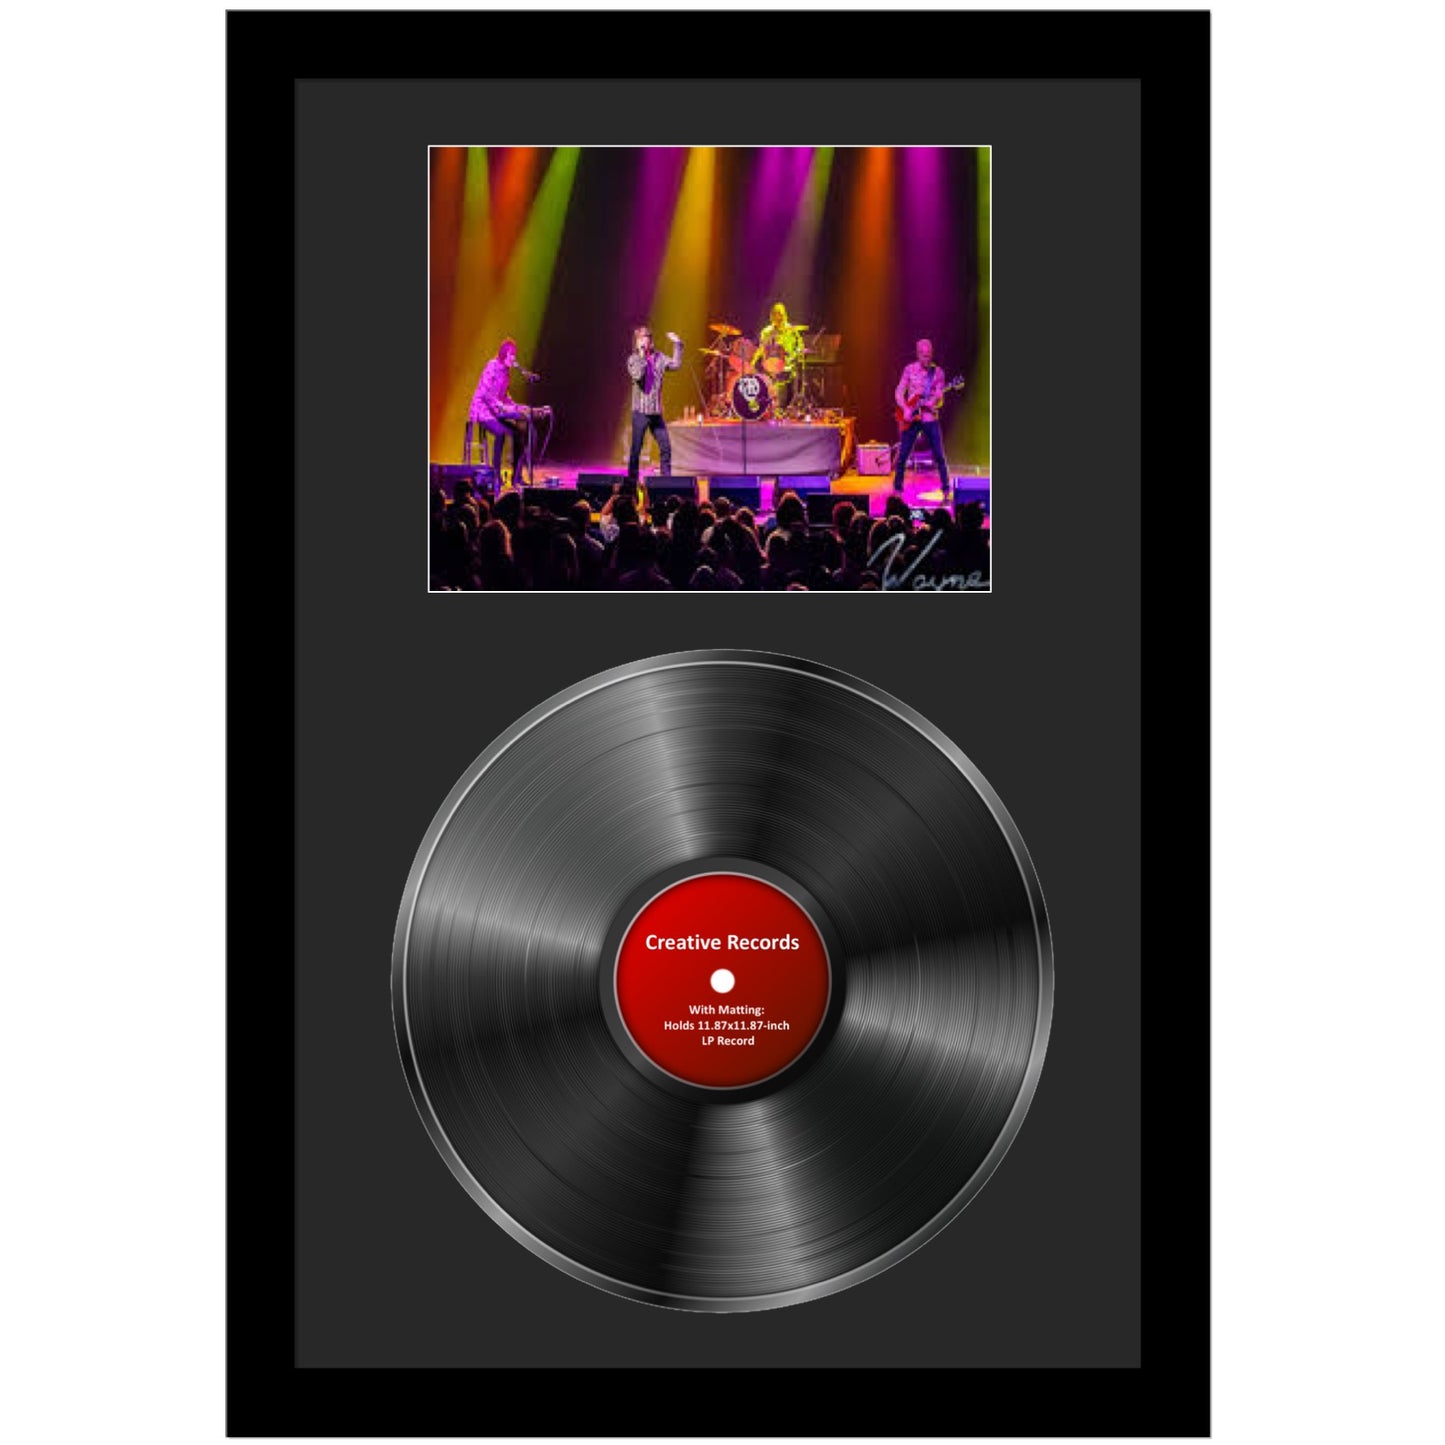 12" Vinyl Record Disc and 8x10 Photo with Mat in our Manhattan Black Molding